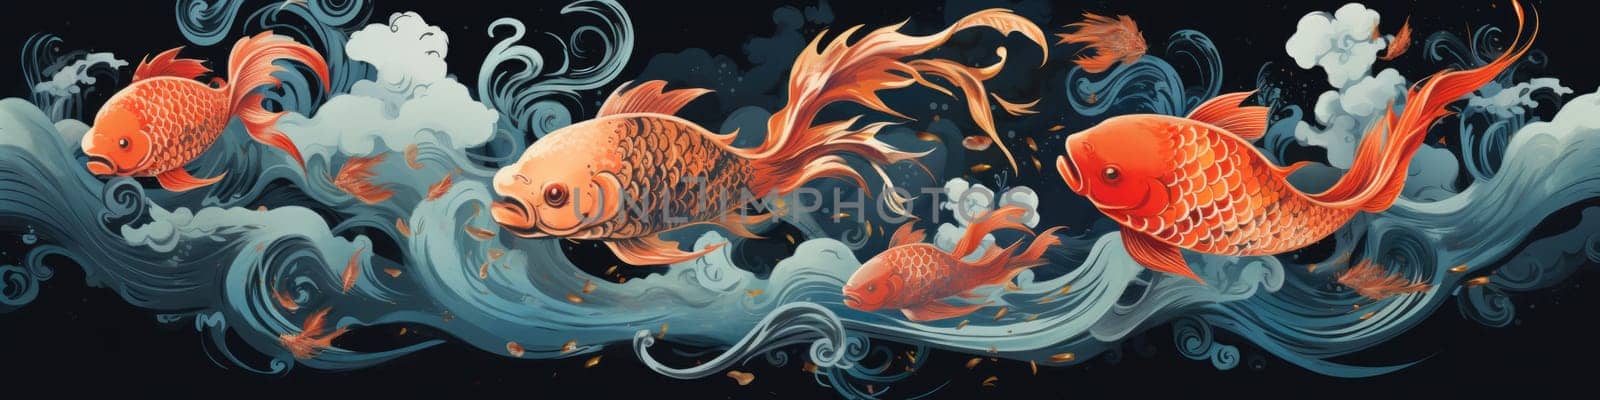 Mysterious fish illustration as banner by Kadula